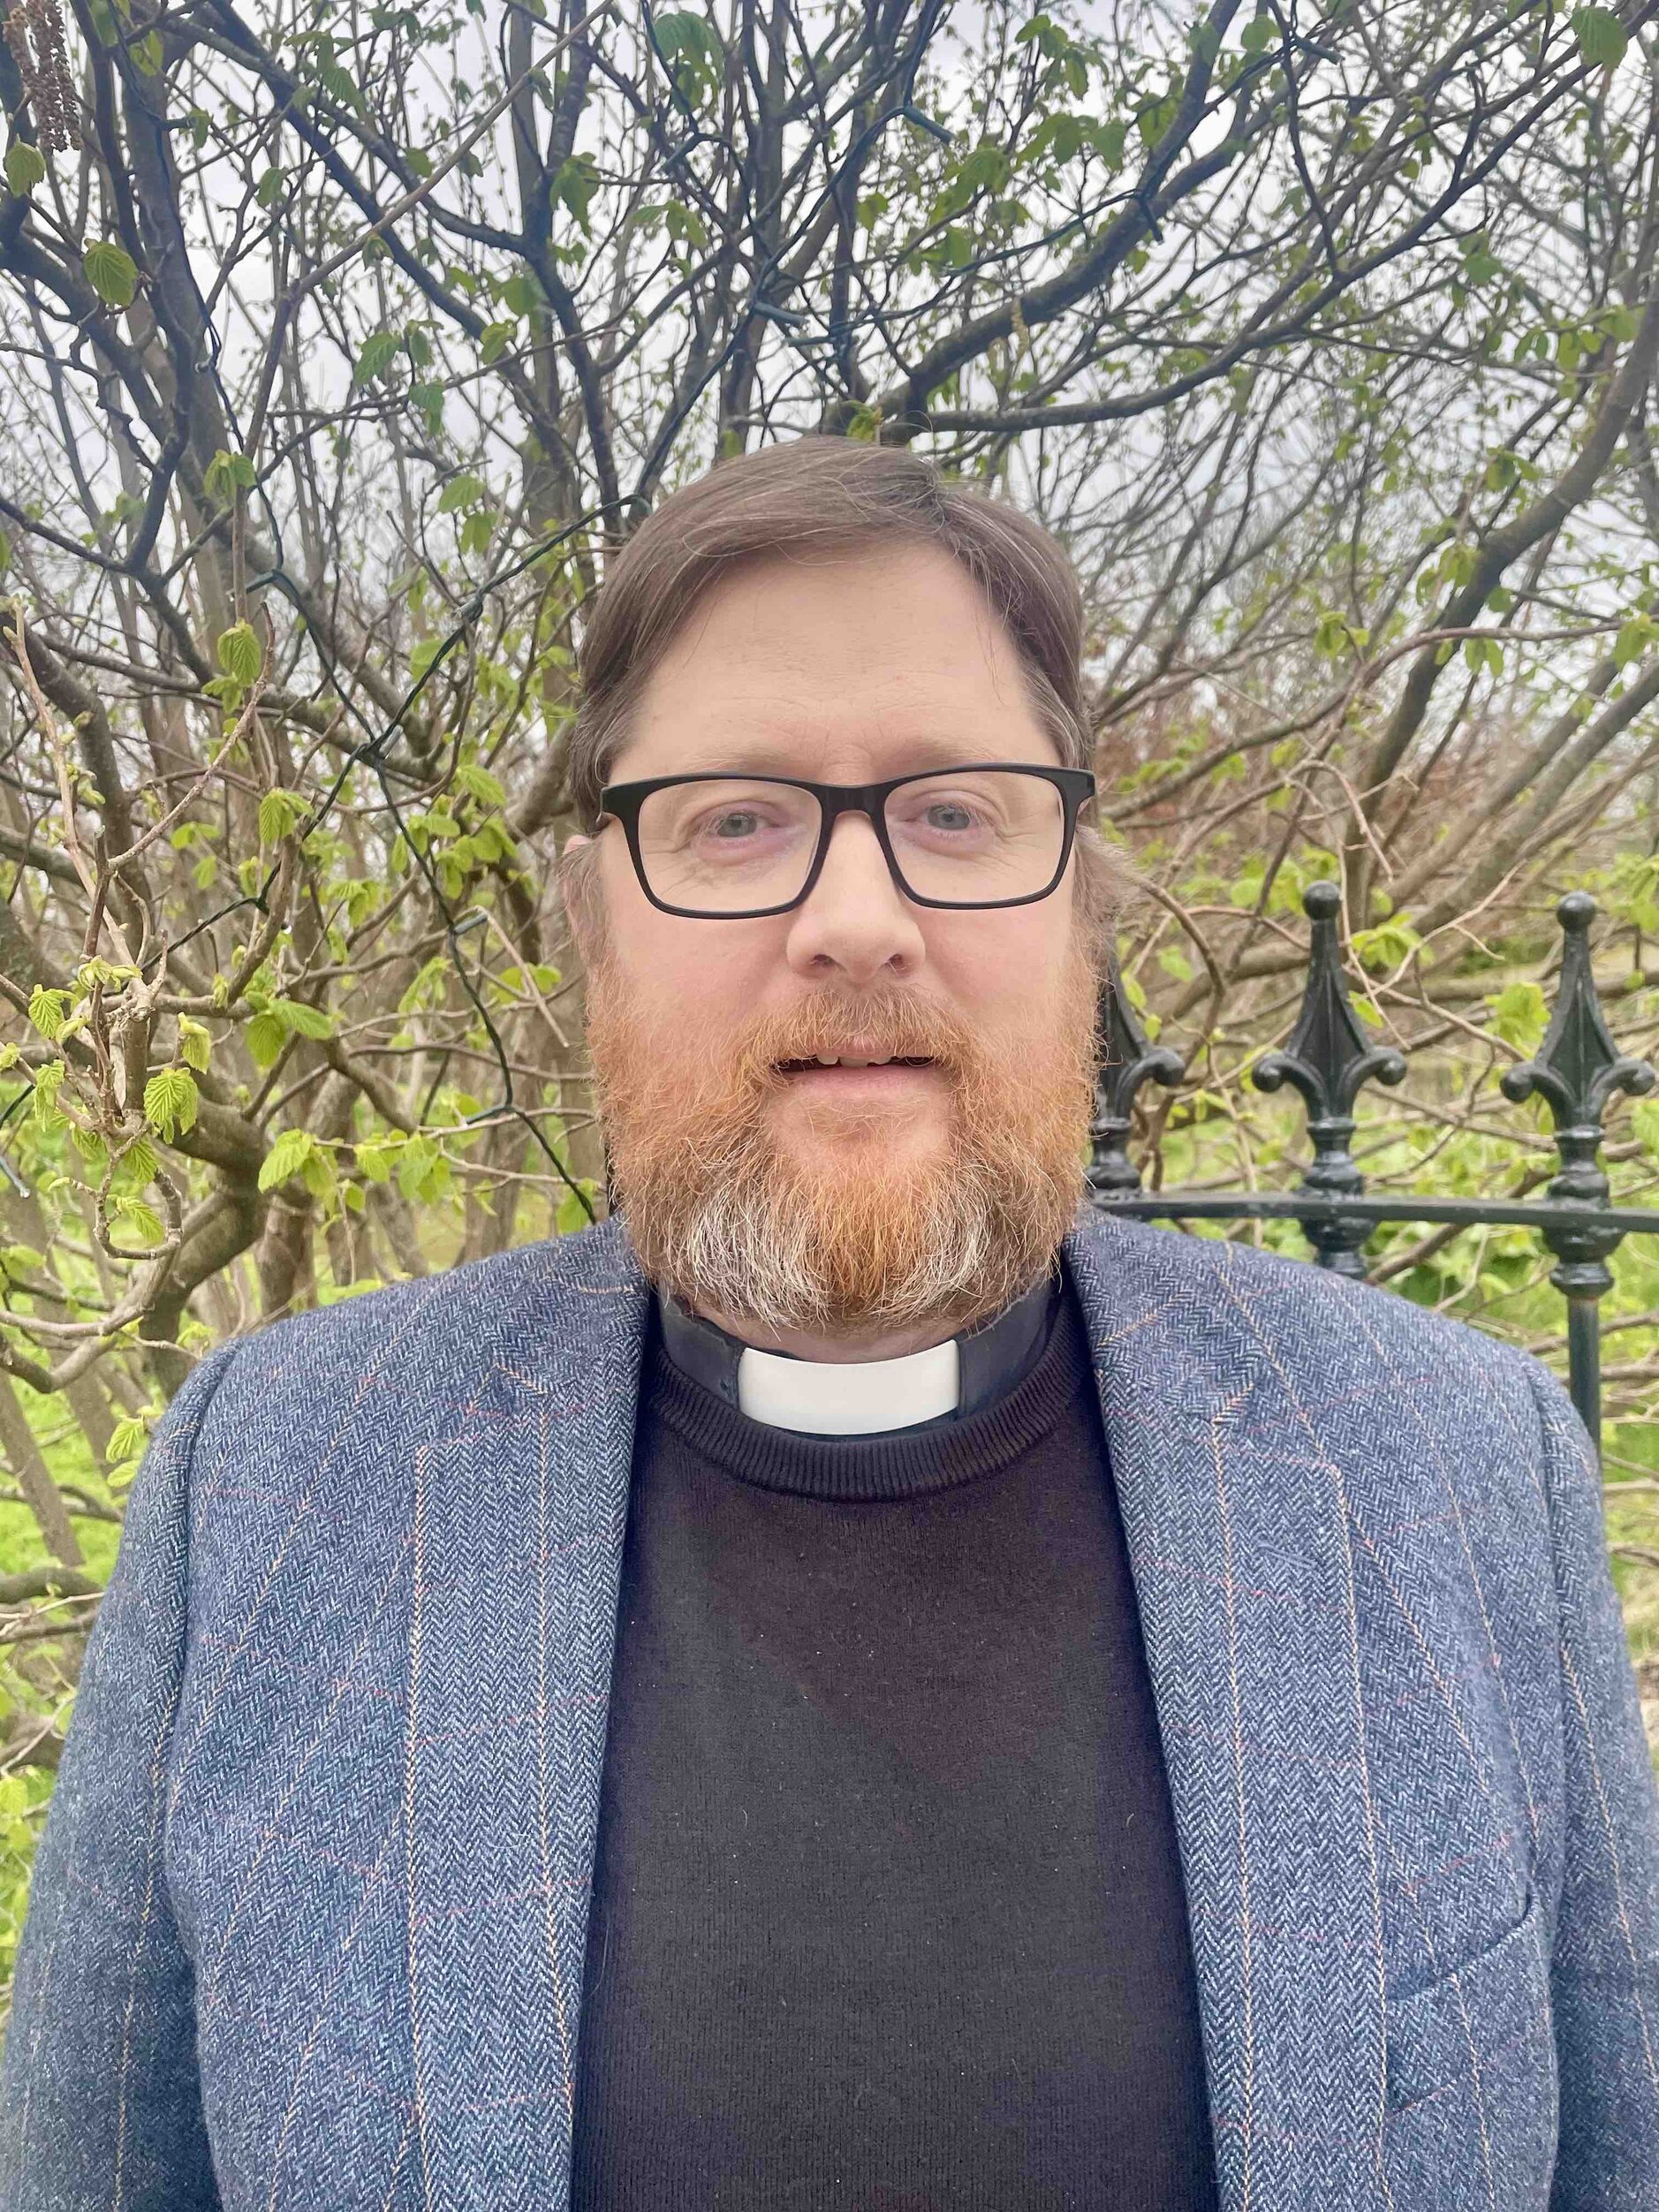 New Archdeacon of Glendalough Appointed